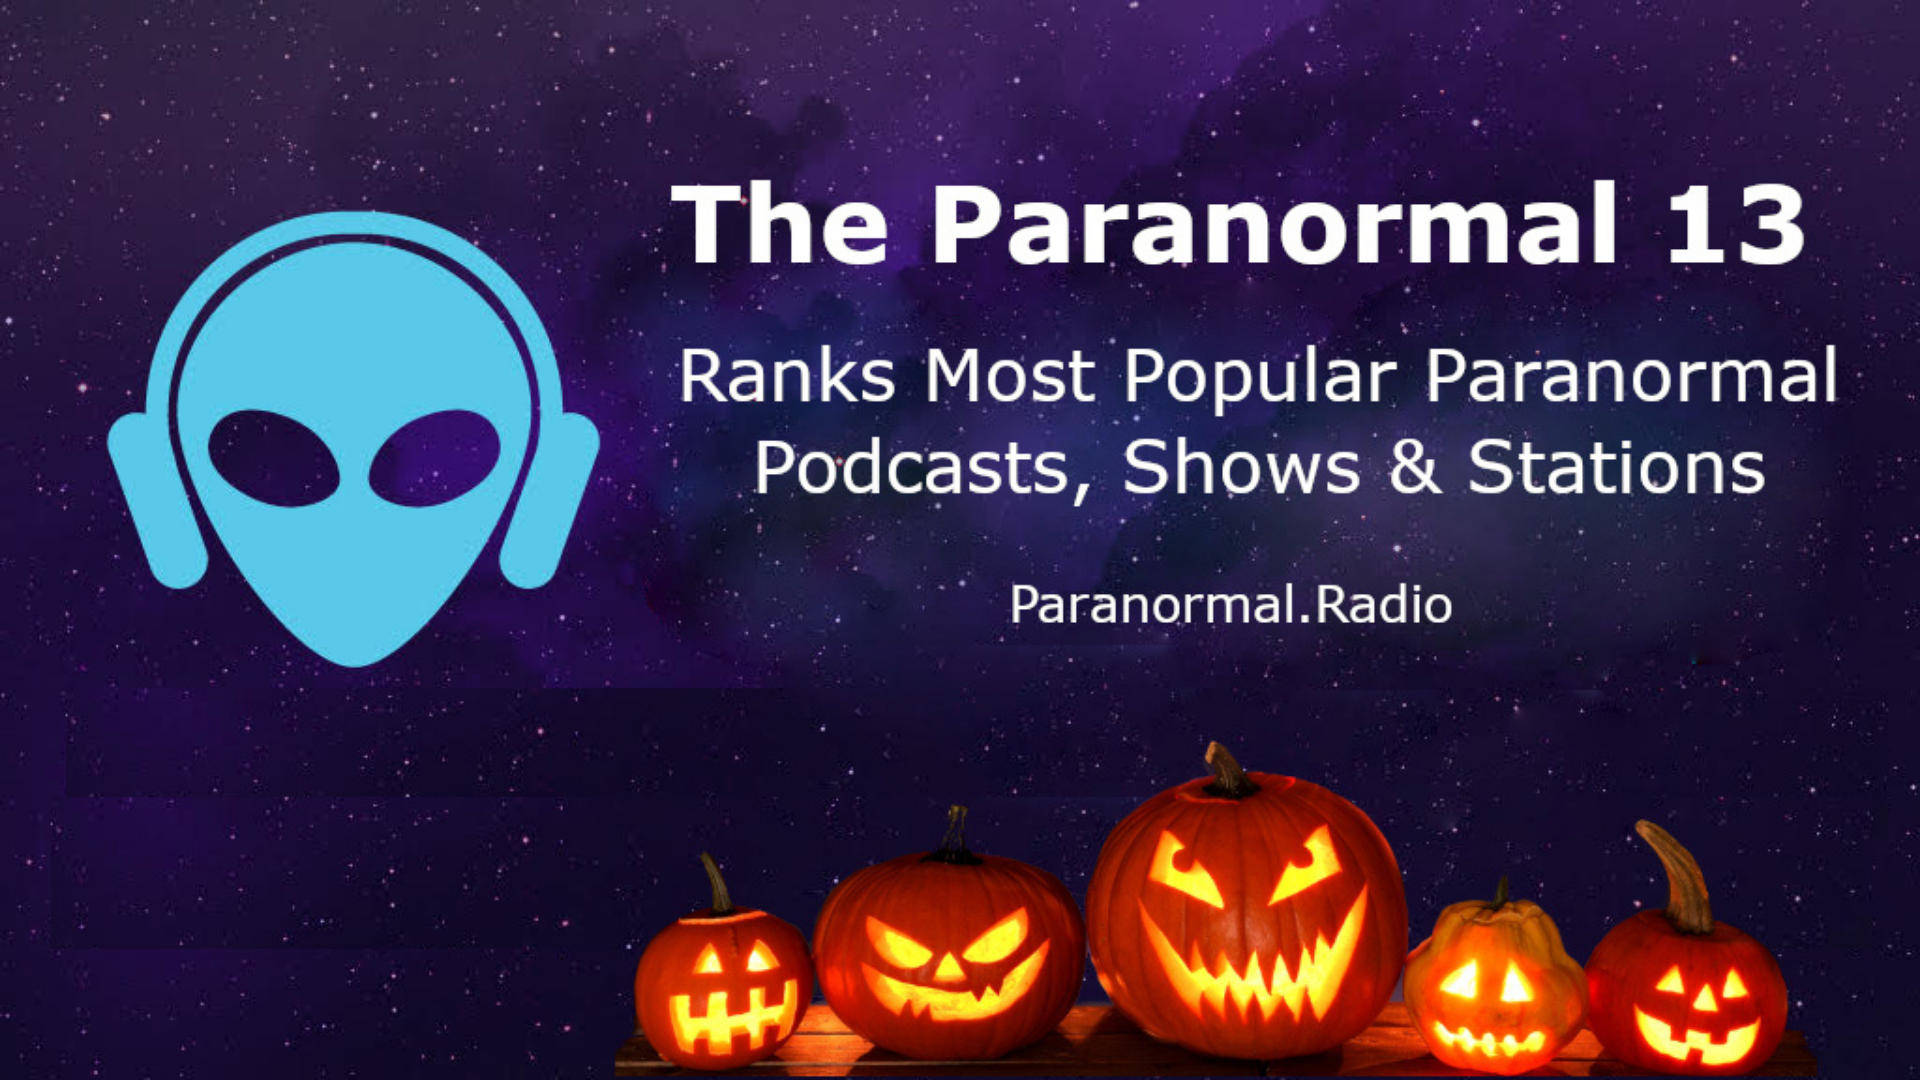 Thumbnail for ‘Paranormal 13’ Ranks “Into The Parabnormal” #4 Show, #5 Podcast